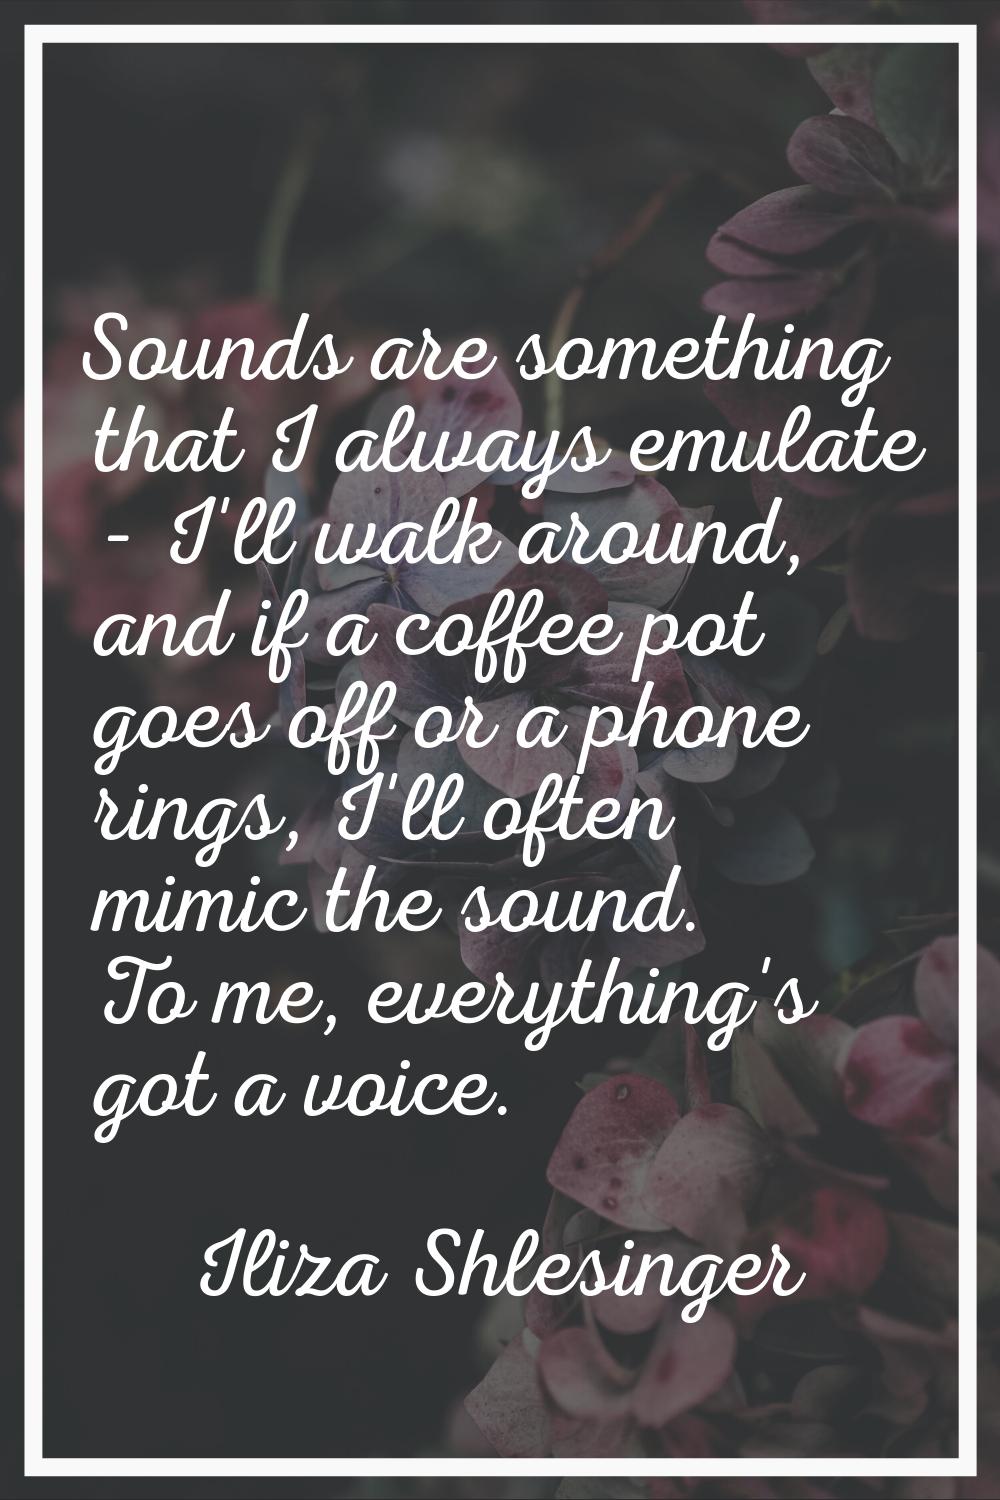 Sounds are something that I always emulate - I'll walk around, and if a coffee pot goes off or a ph